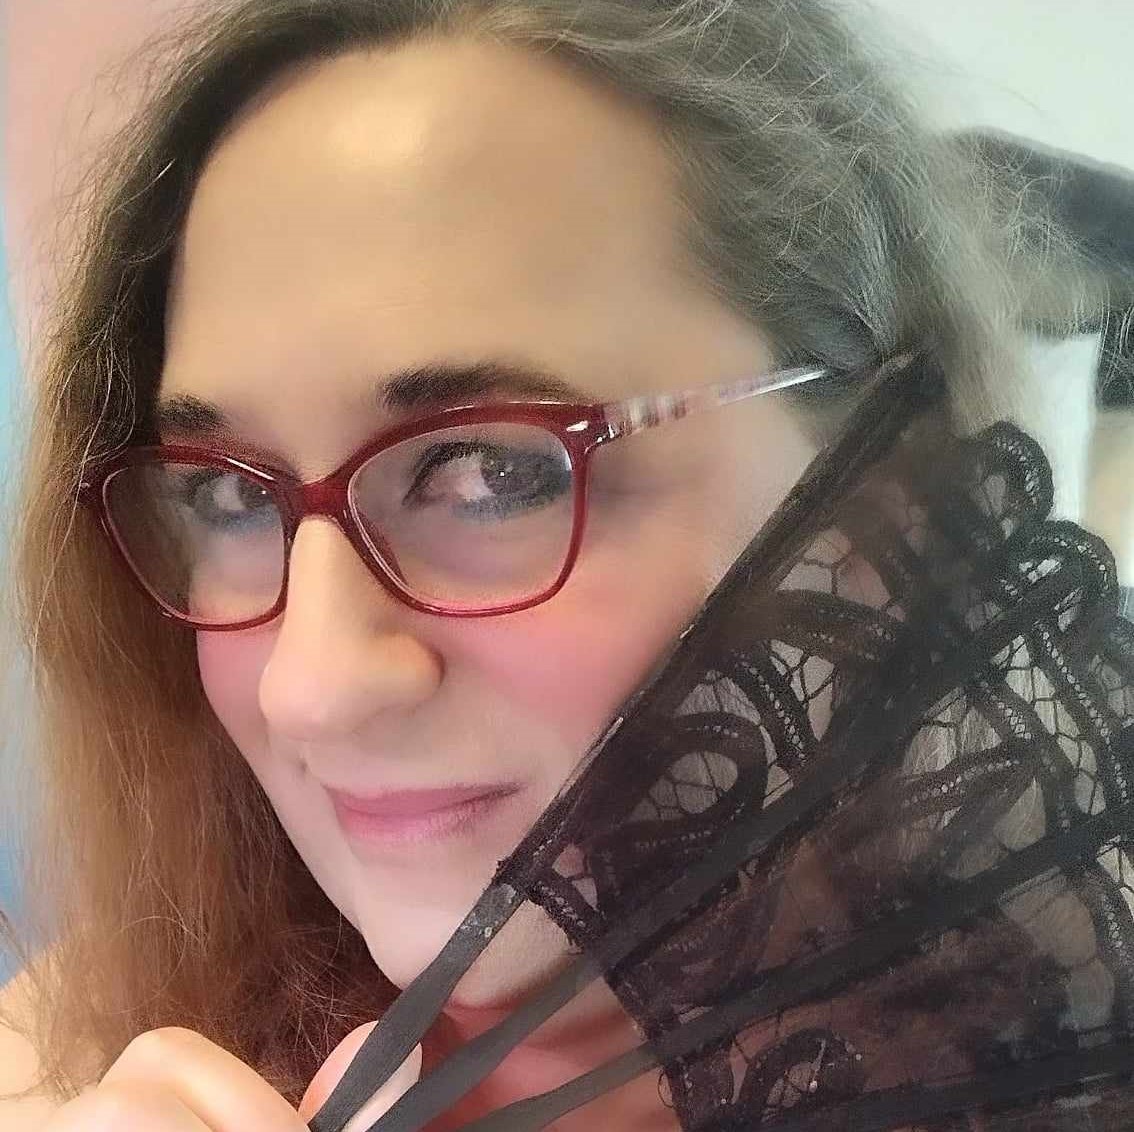 Vanna is shown wearing red glasses with clear arms, smiling coyly behind a black lace fan.